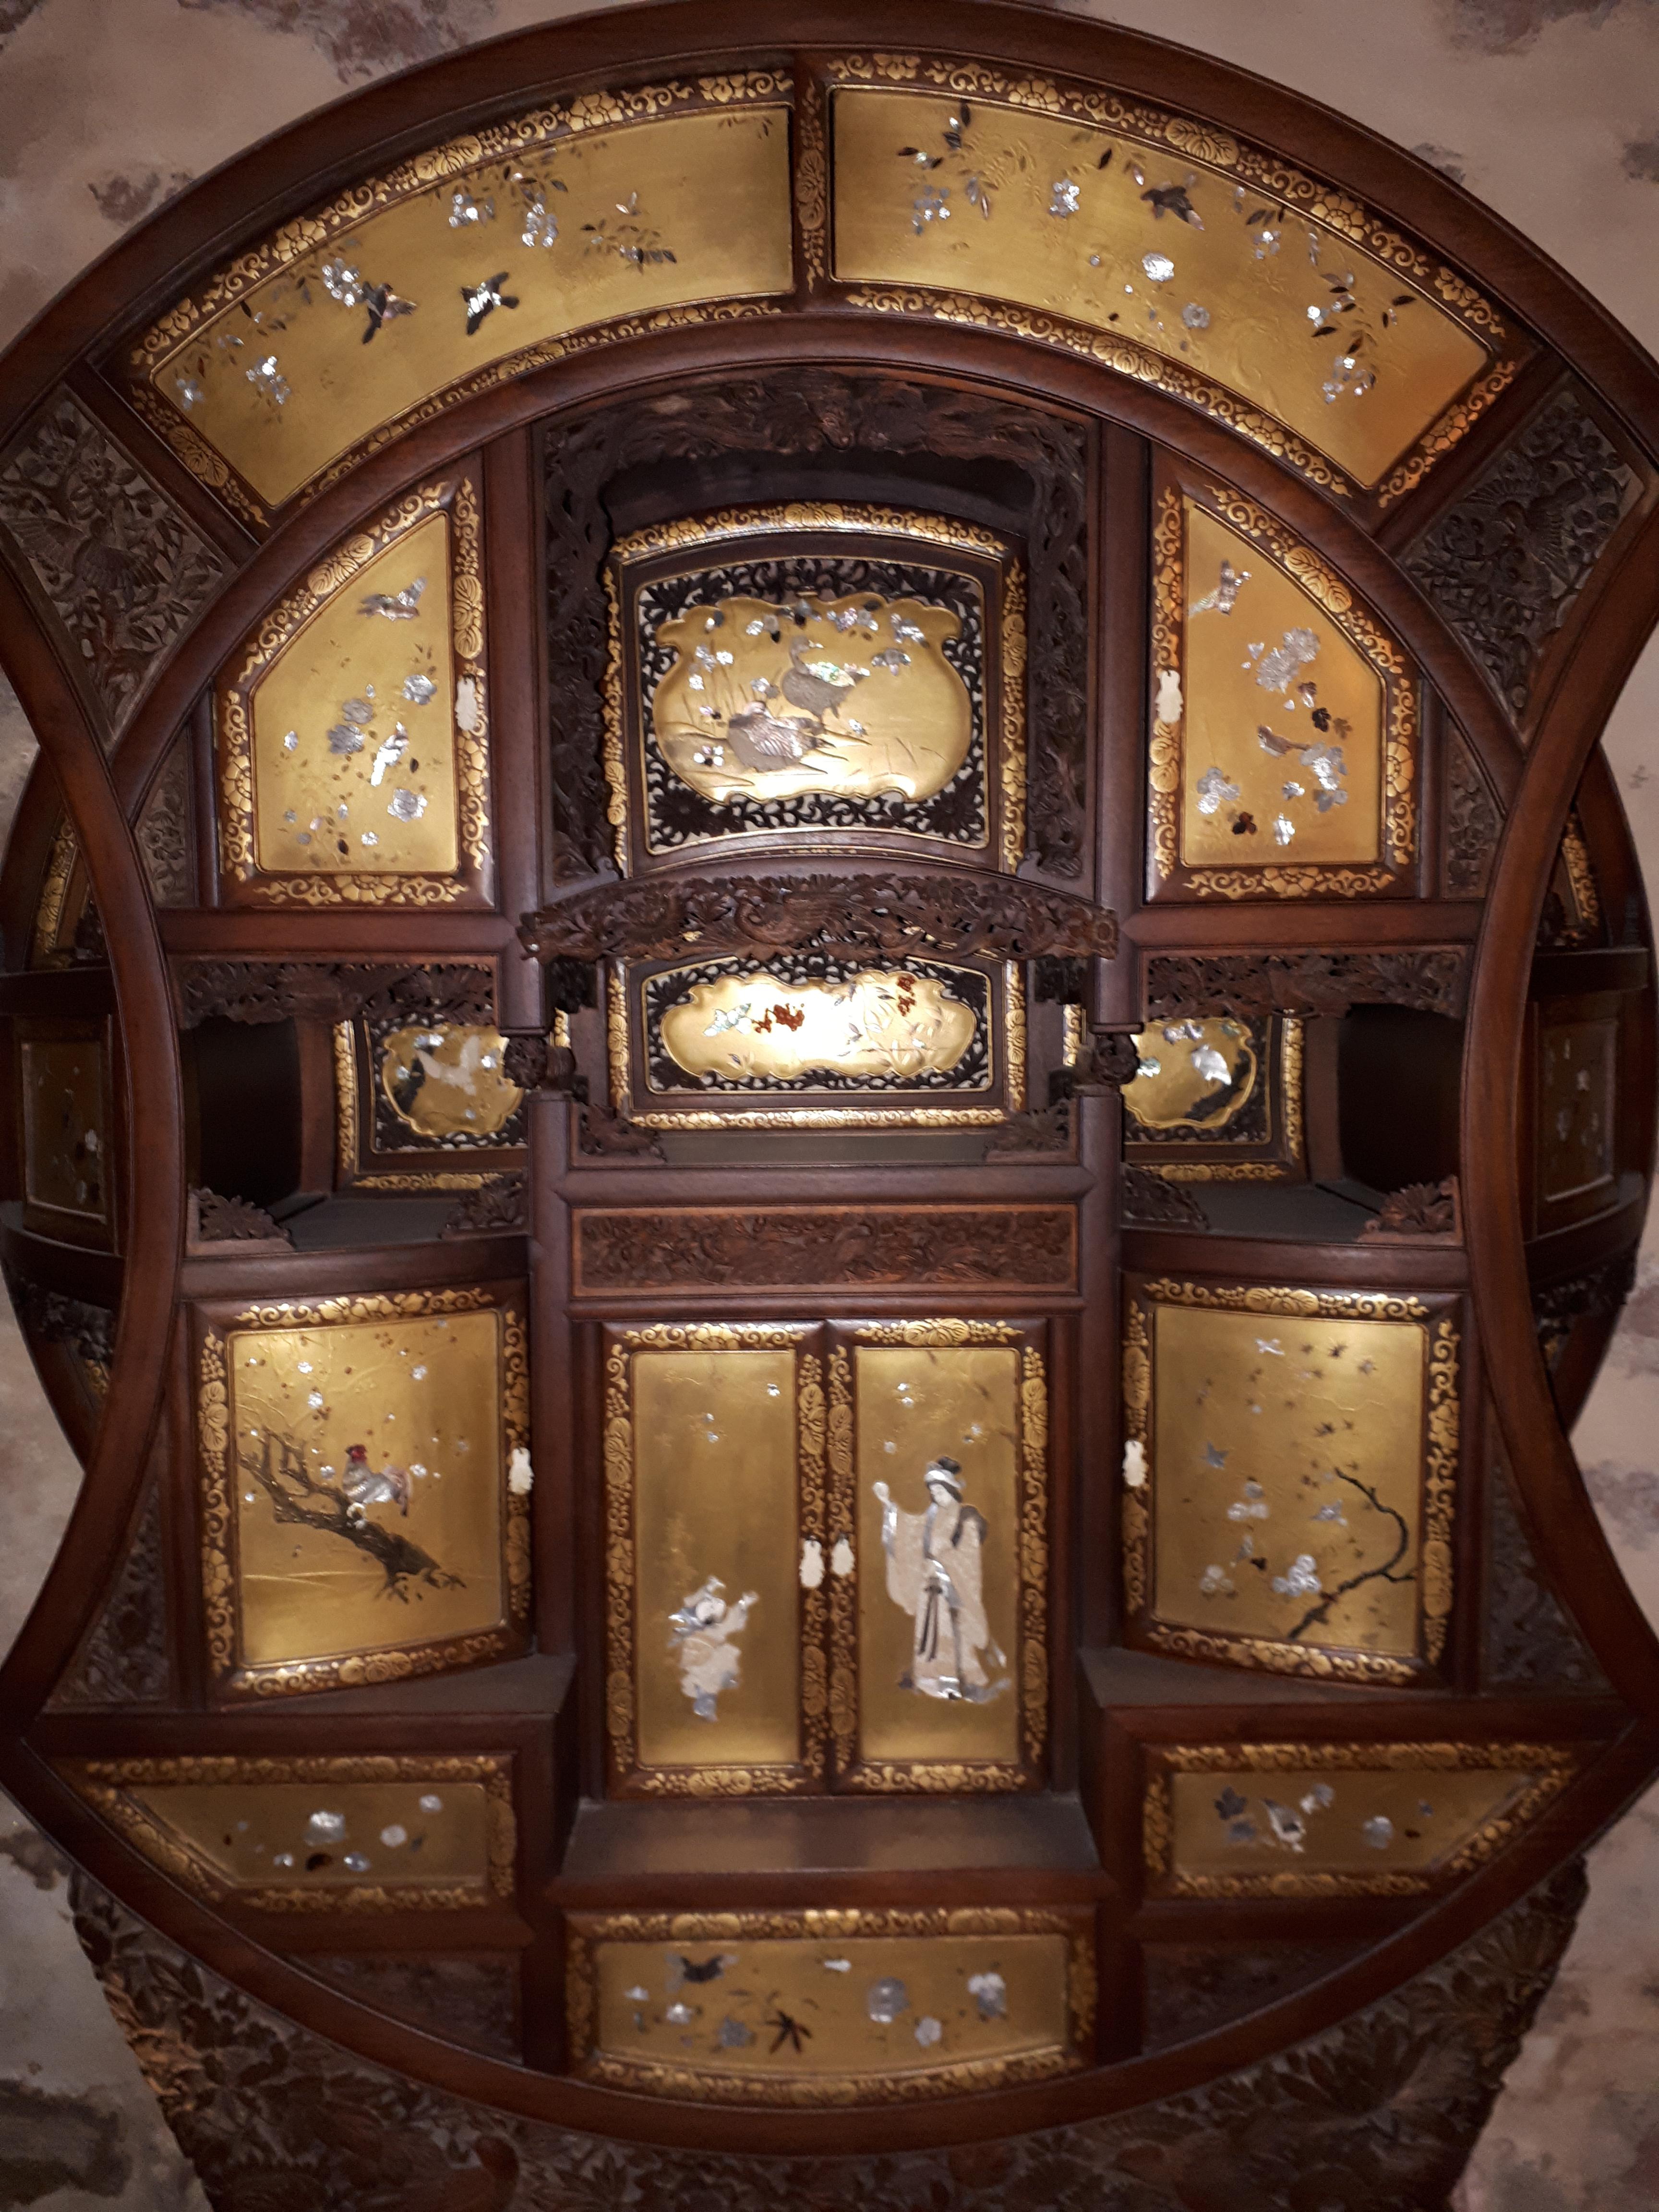 Very rare Japanese Shibayama cabinet with multiple leaves, drawers and sliding panels. Indeed, the quality of sculpture, the variety of materials (ivory, mother-of-pearl, but also brown horn and coral), the backgrounds of the panels finely executed